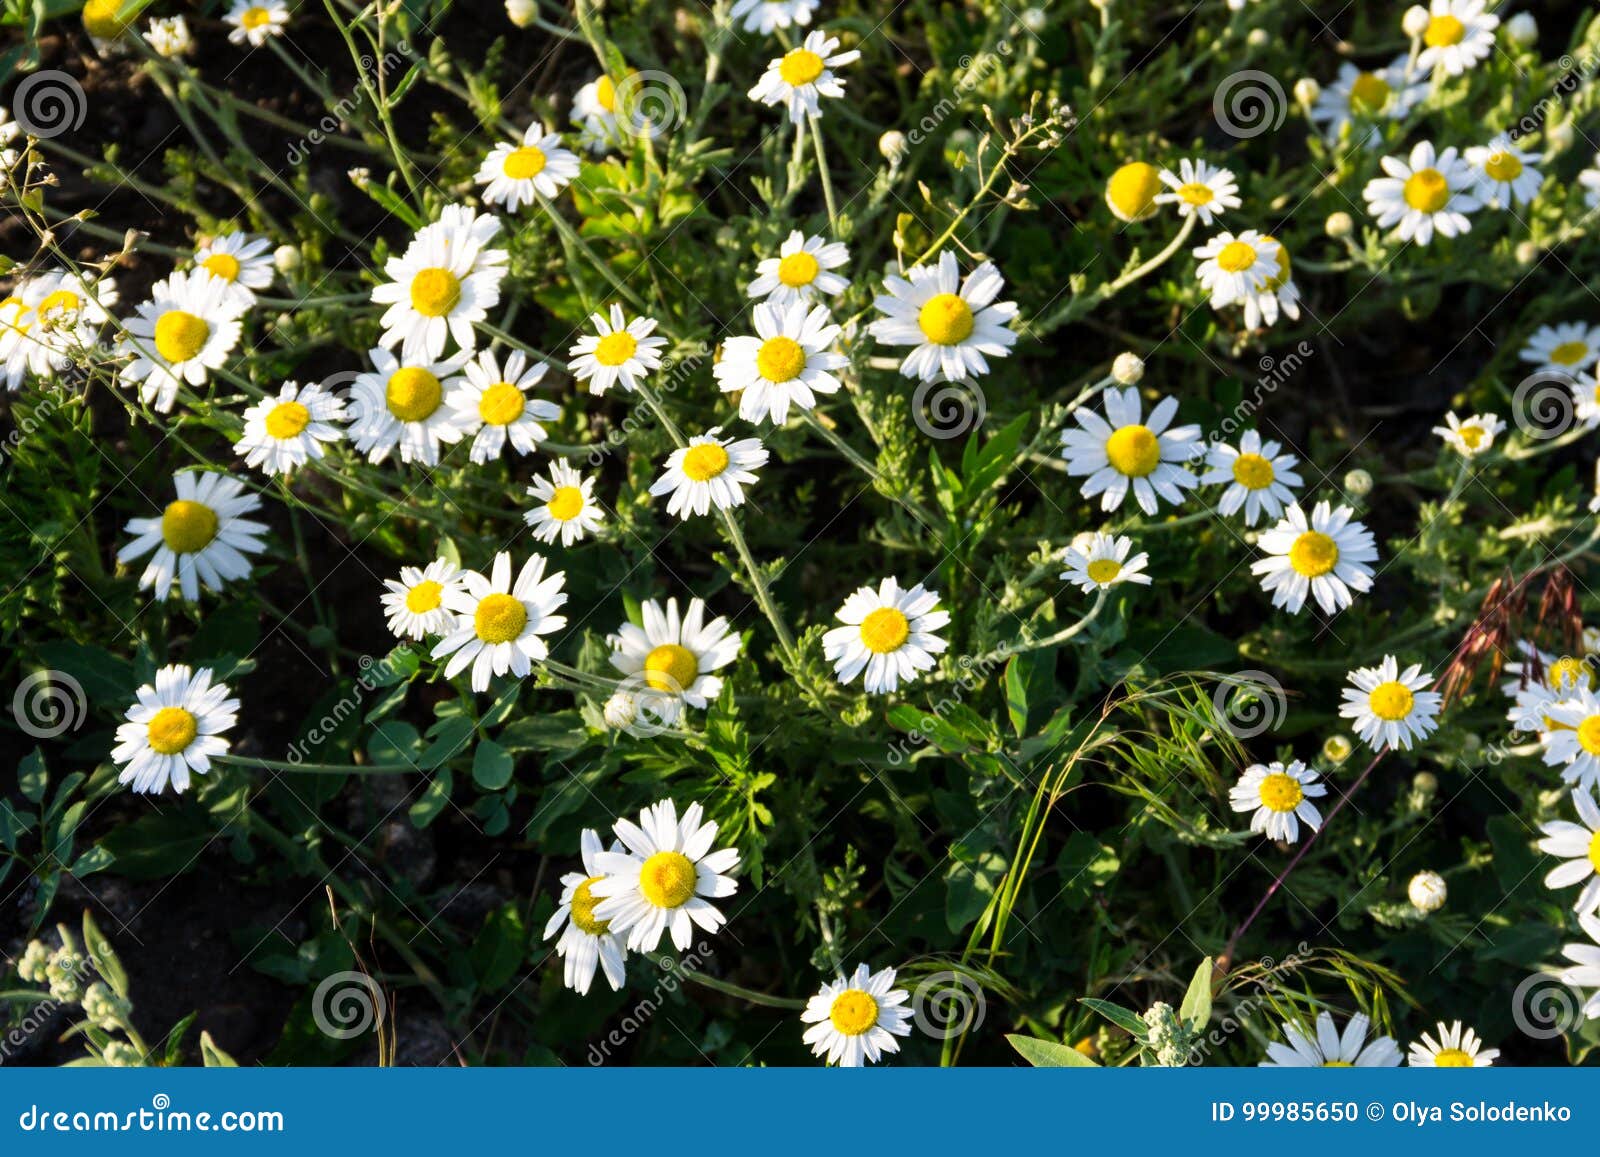 Meadow Of Officinal Camomile Flowers Matricaria Chamomilla Stock Photo